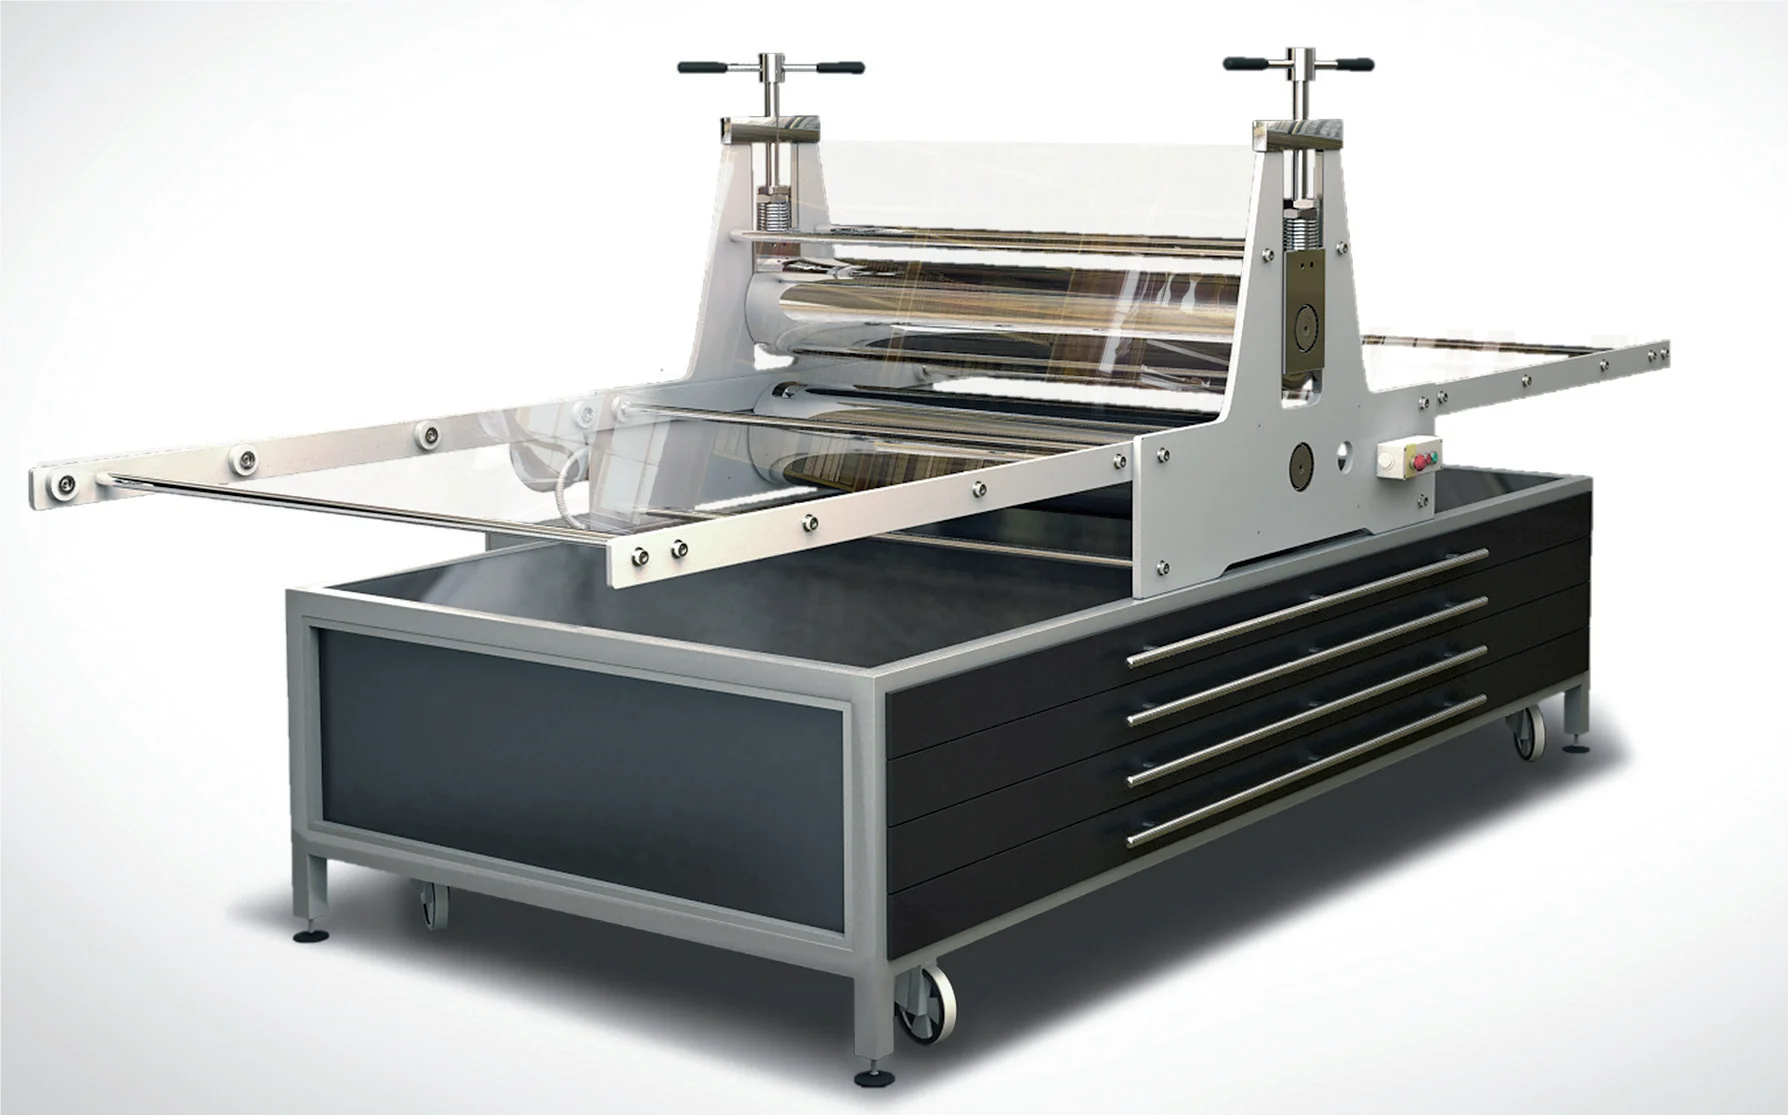 Good Supplier - Large Printing Press Perfect for Beginners